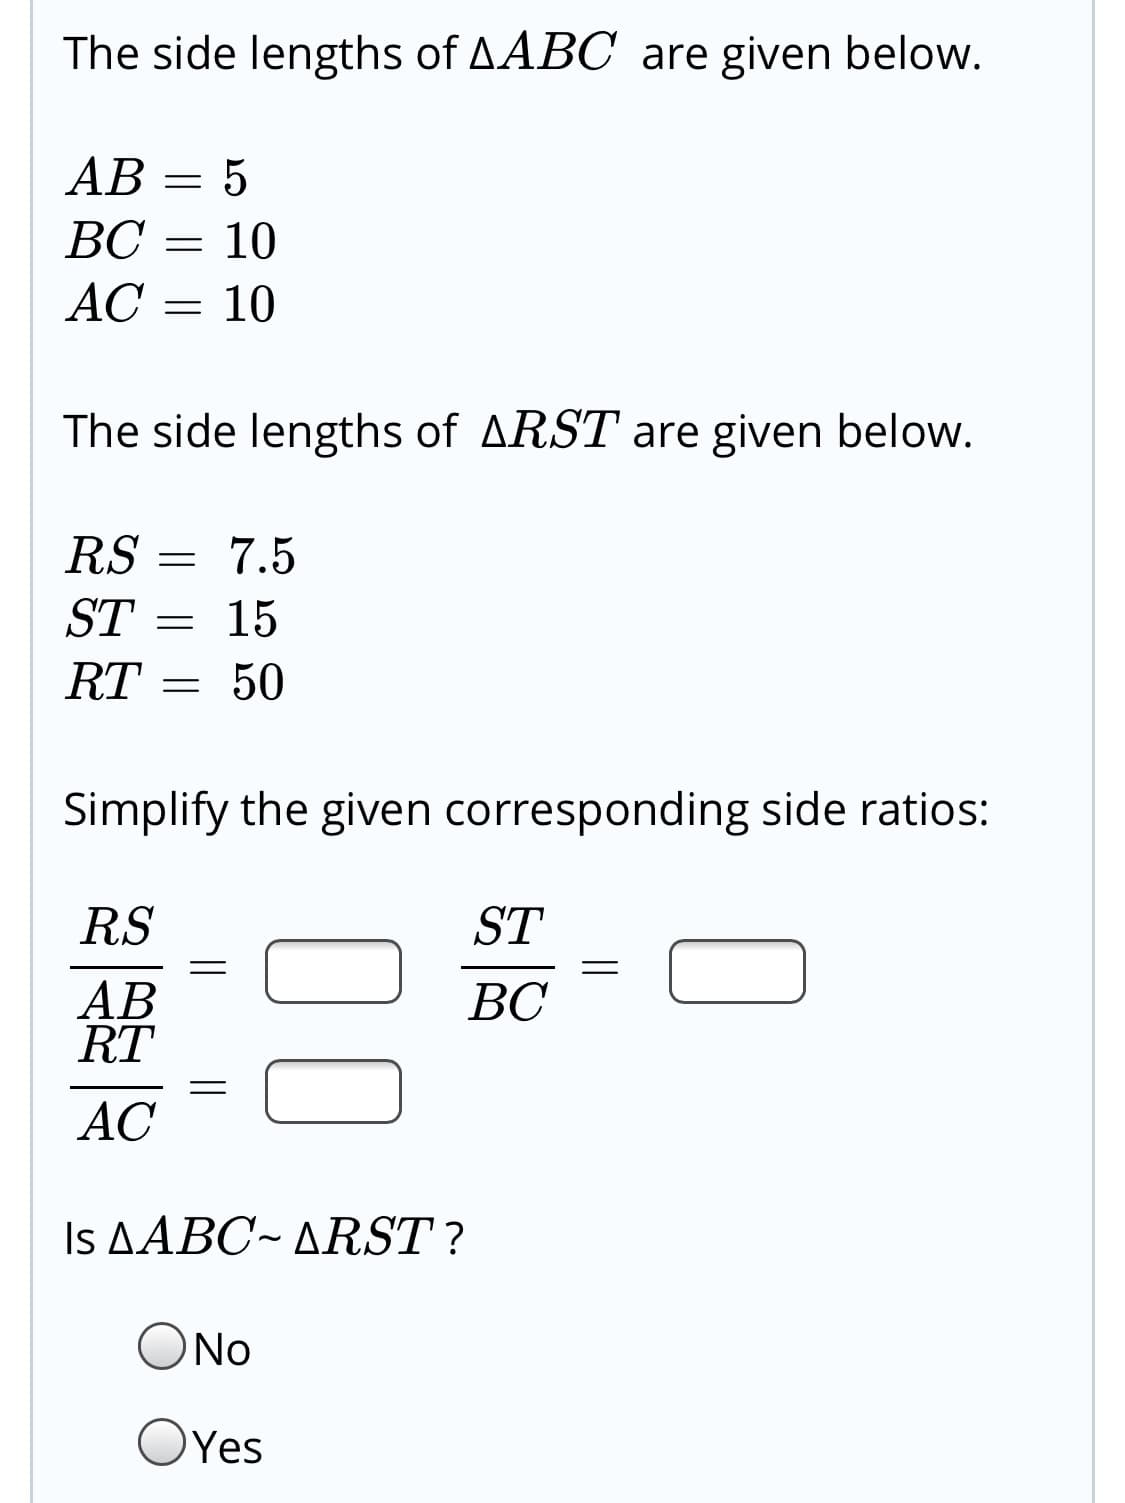 The side lengths of AABC are given below.
AB = 5
ВС
10
AC
10
The side lengths of ARST are given below.
RS
ST
7.5
15
RT
50
Simplify the given corresponding side ratios:
RS
ST
AB
RT
ВС
AC
Is ΔΑΒΟ-ΔRST ?
ONo
OYes
